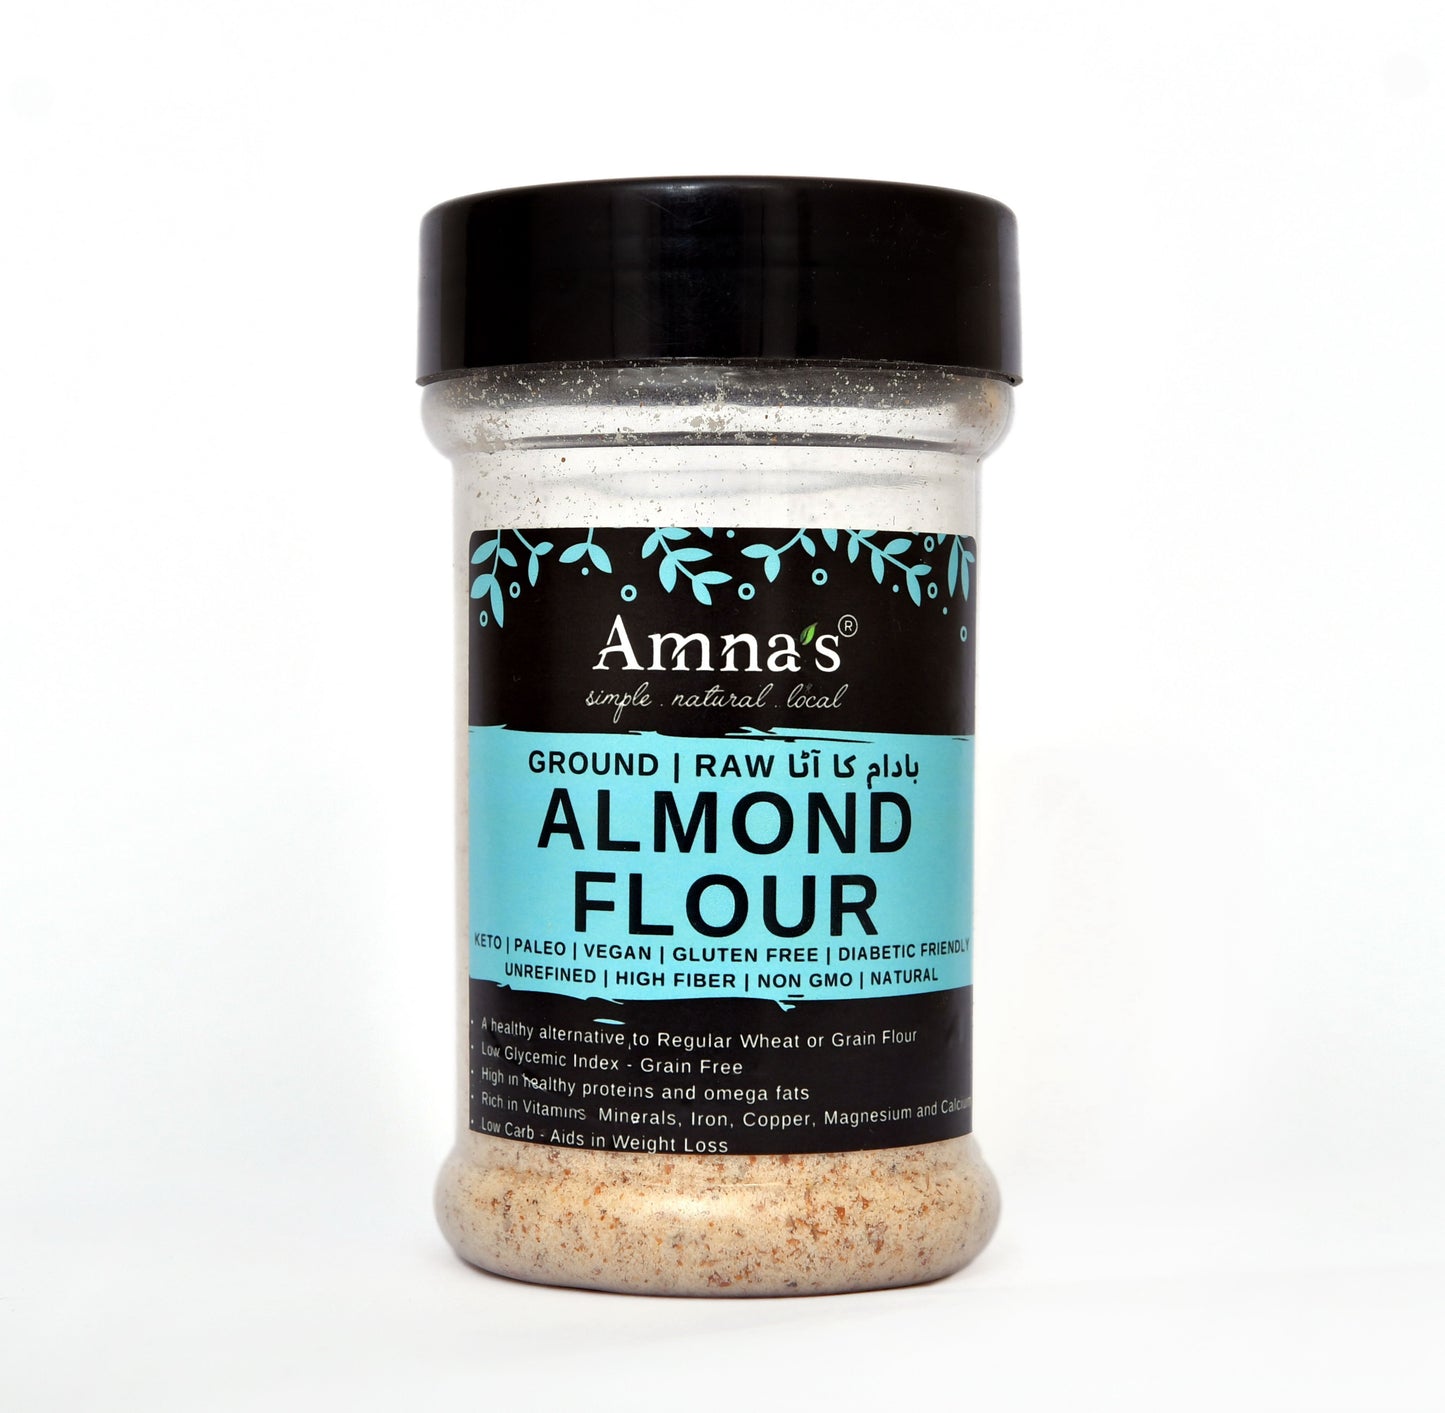 Almond Flour (Almond Meal) | All-Natural | Unblanched - - gluten free foods Pakistan Lahore Islamabad Karachi Amna's Naturals & Organics